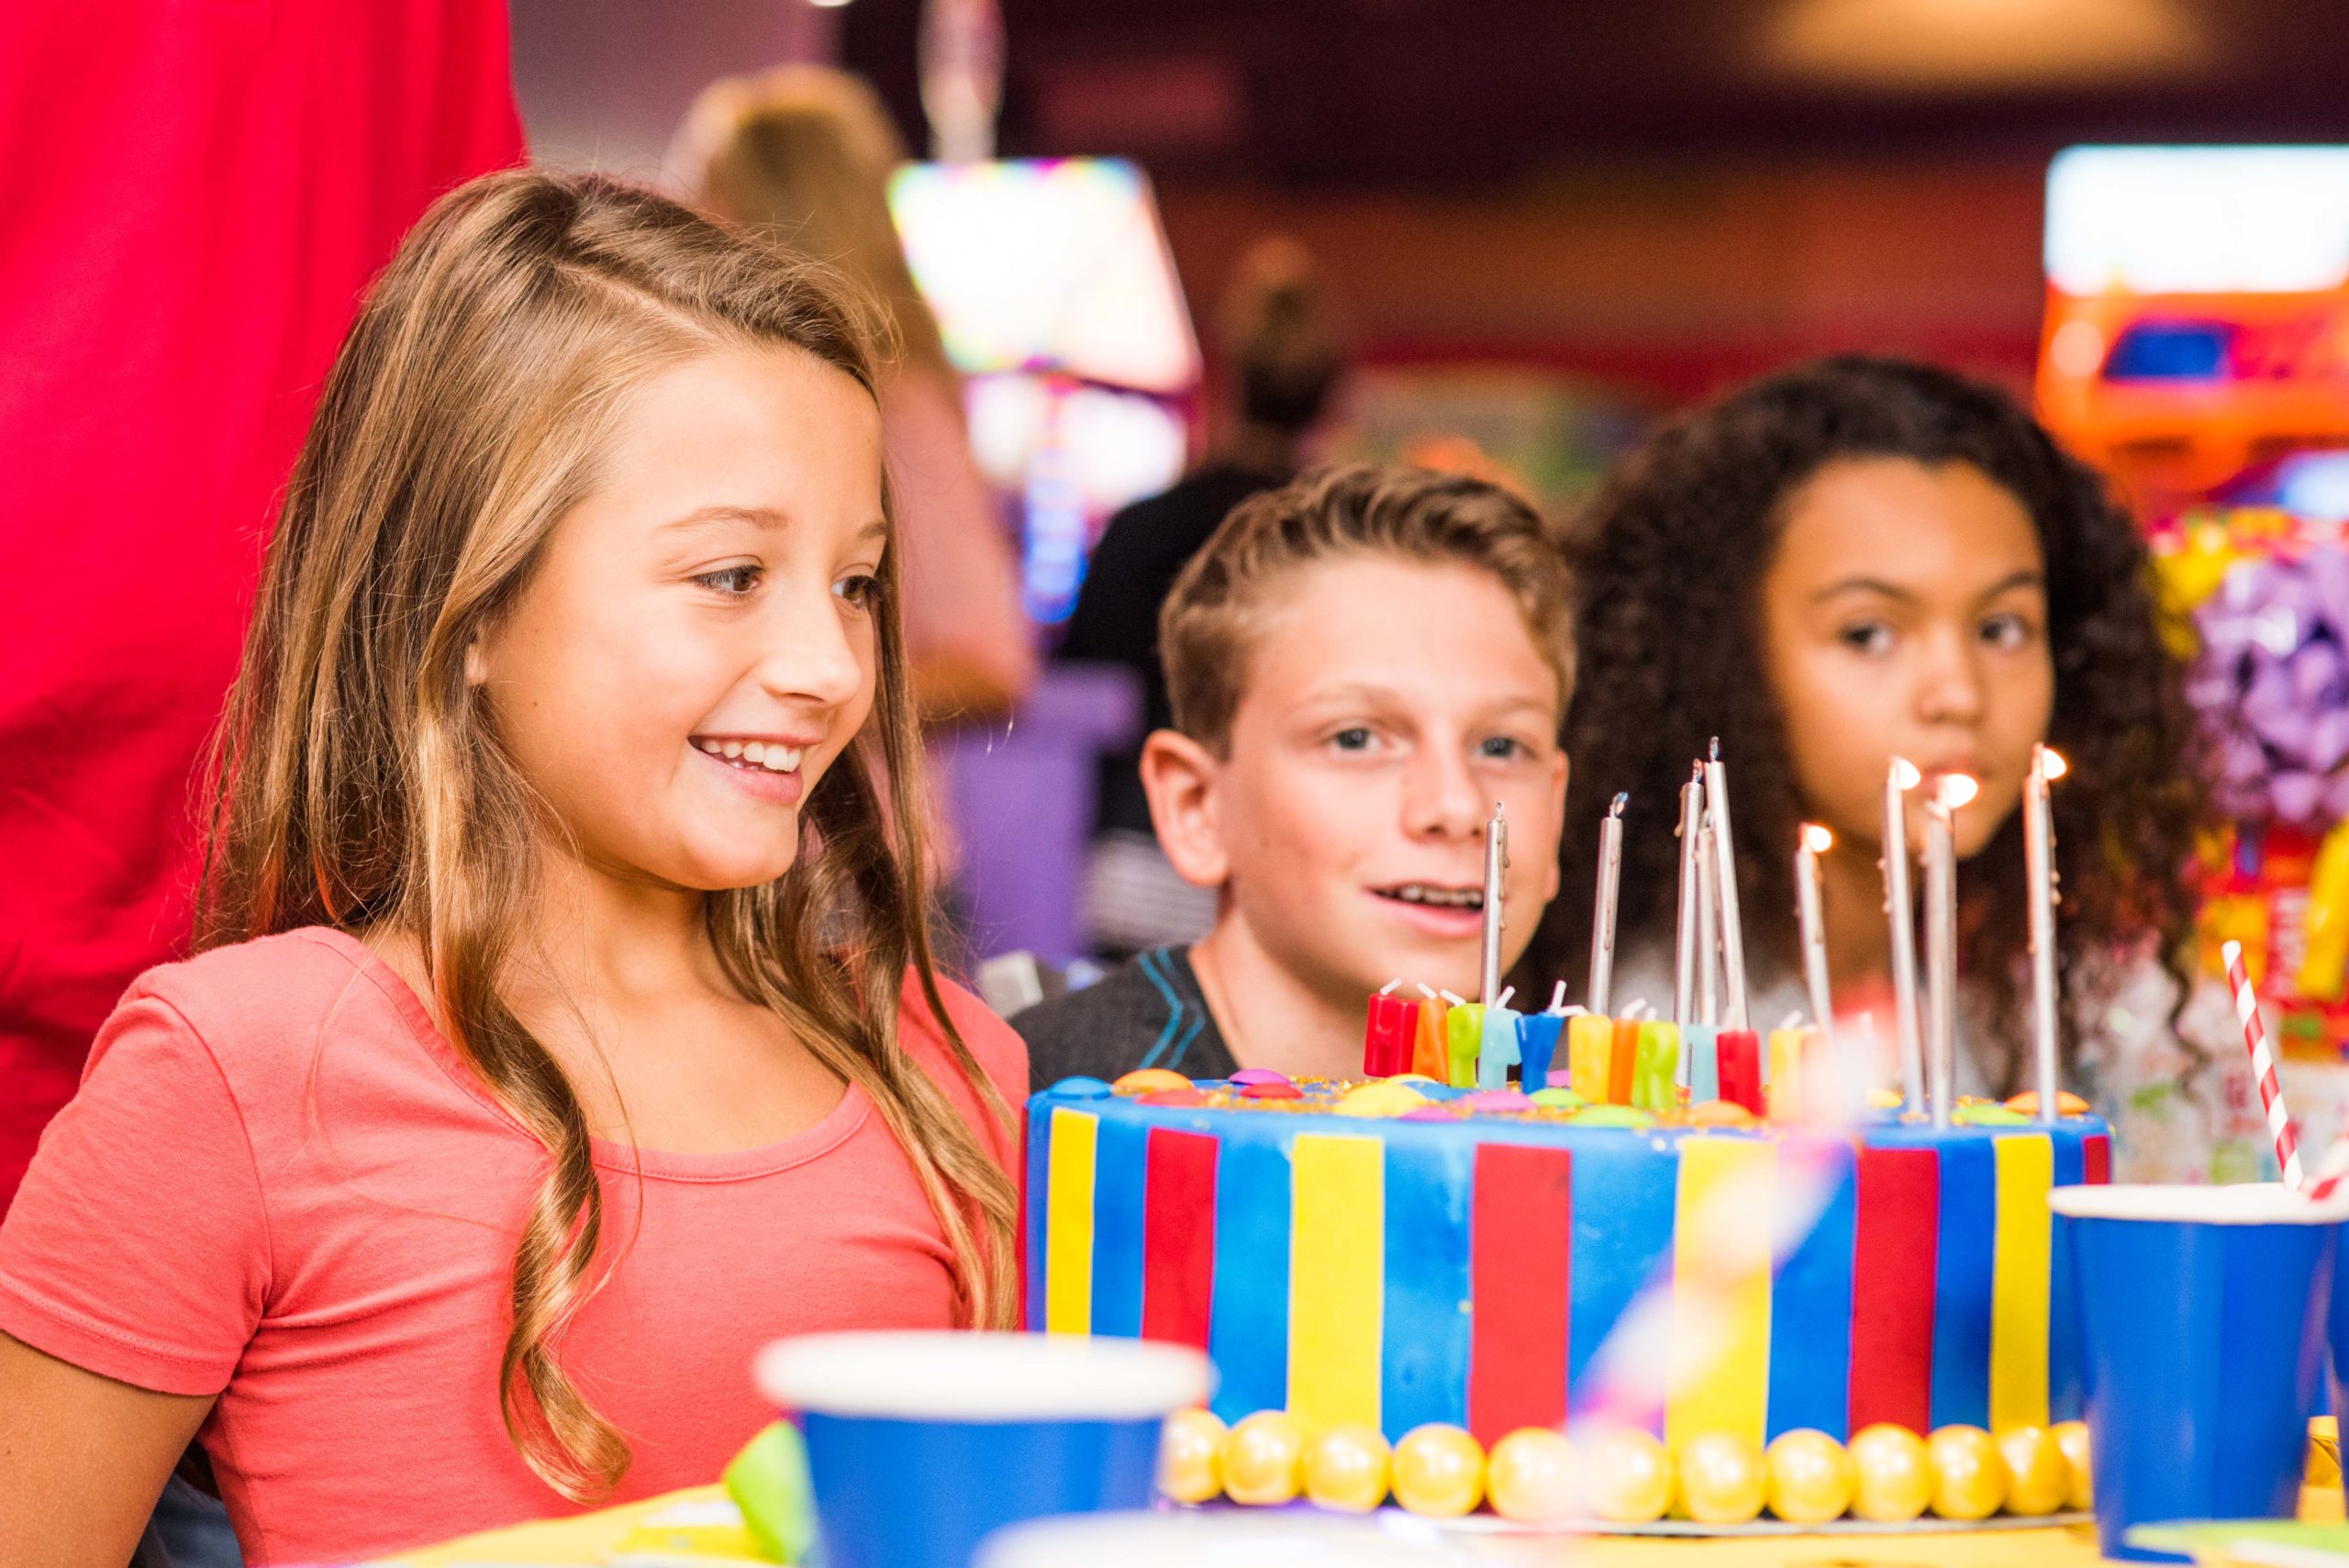 WE KNOW HOW TO MAKE YOUR CHILD’S PARTY A BLAST